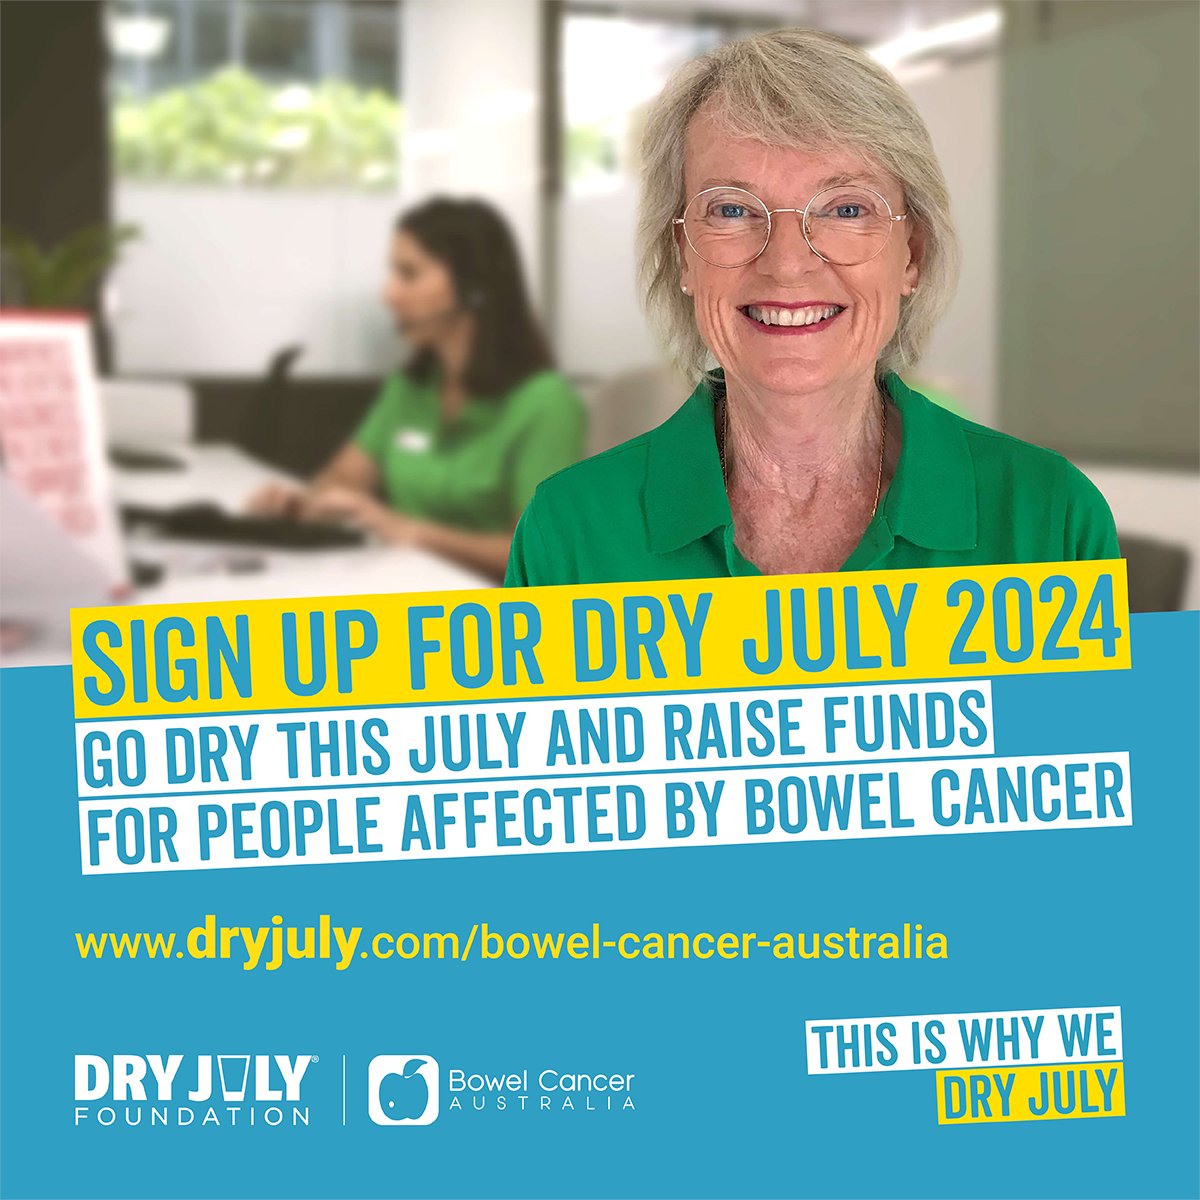 We’re excited to share that you can now officially sign up for Dry July 2024 in support of Bowel Cancer Australia!⁠ By signing up and raising funds, you'll be supporting vital services and care for people affected by cancer. Helping Bowel Cancer Australia to expand the